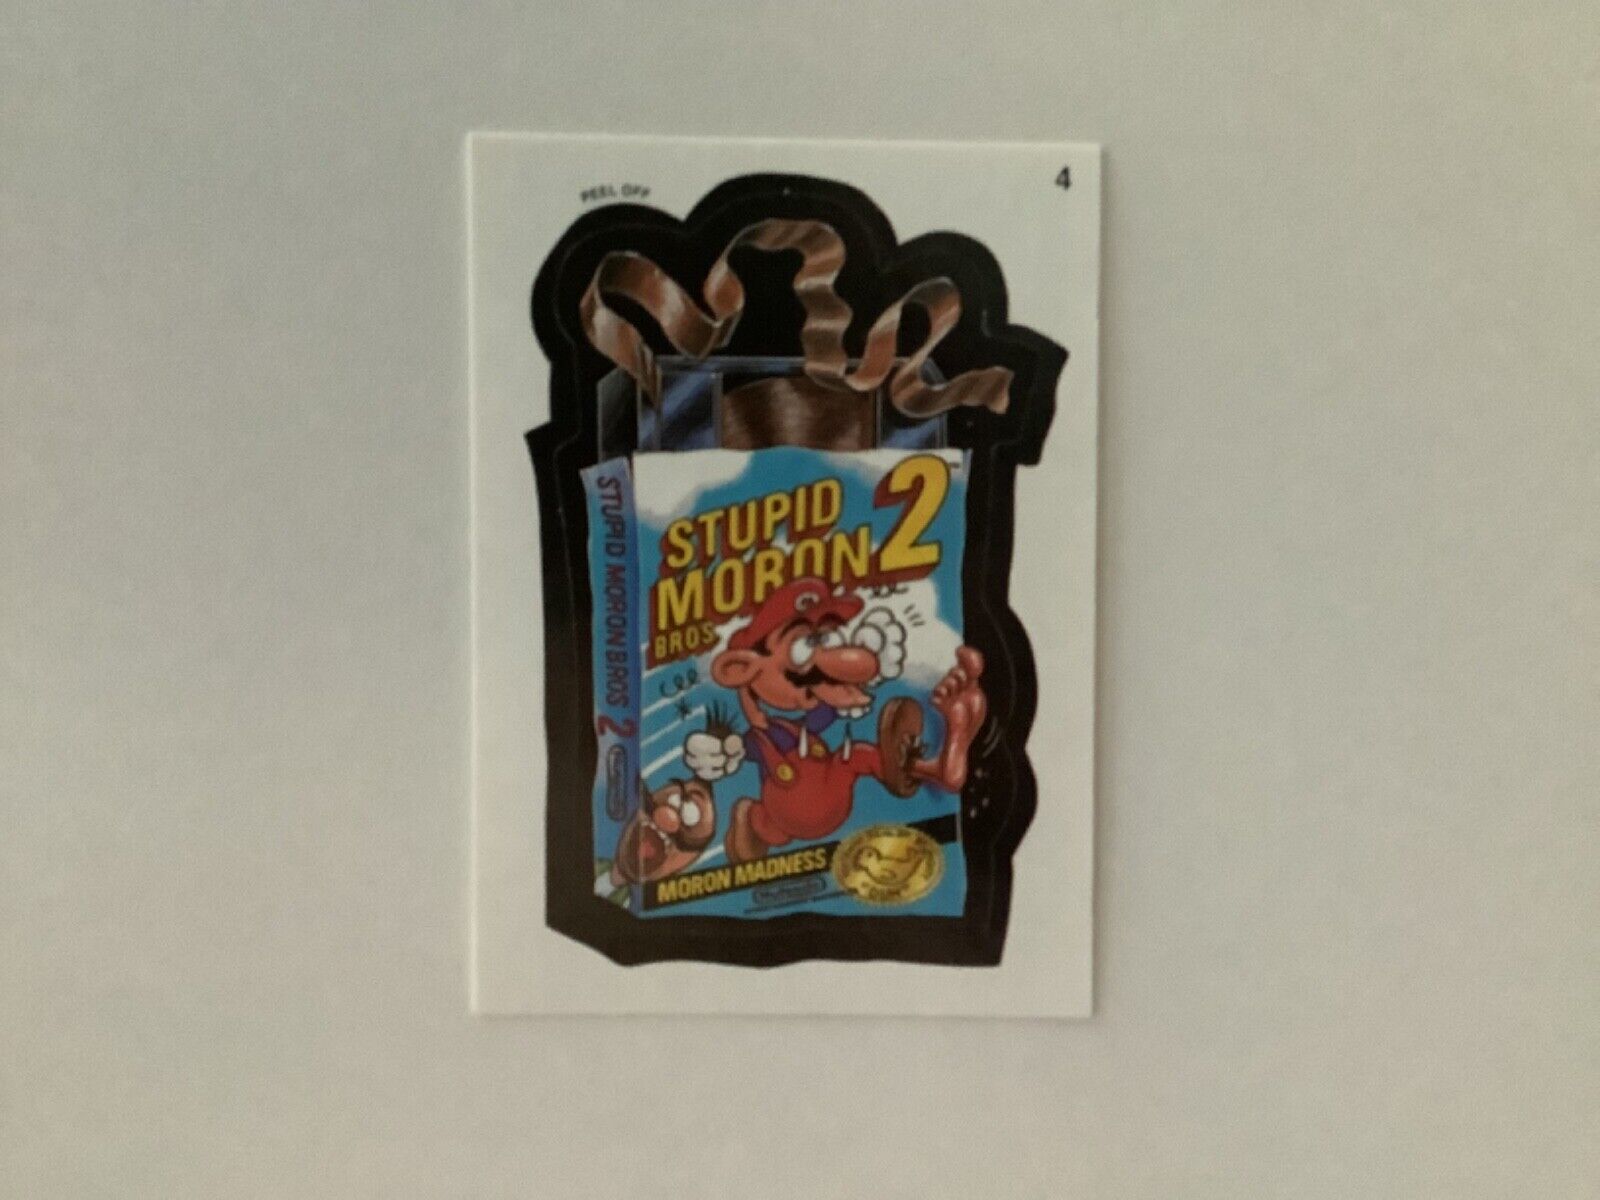 1991 TOPPS WACKY PACKAGES STUPID MORON 2, SUPER MARIO BROTHERS MOVIE PARODY NM